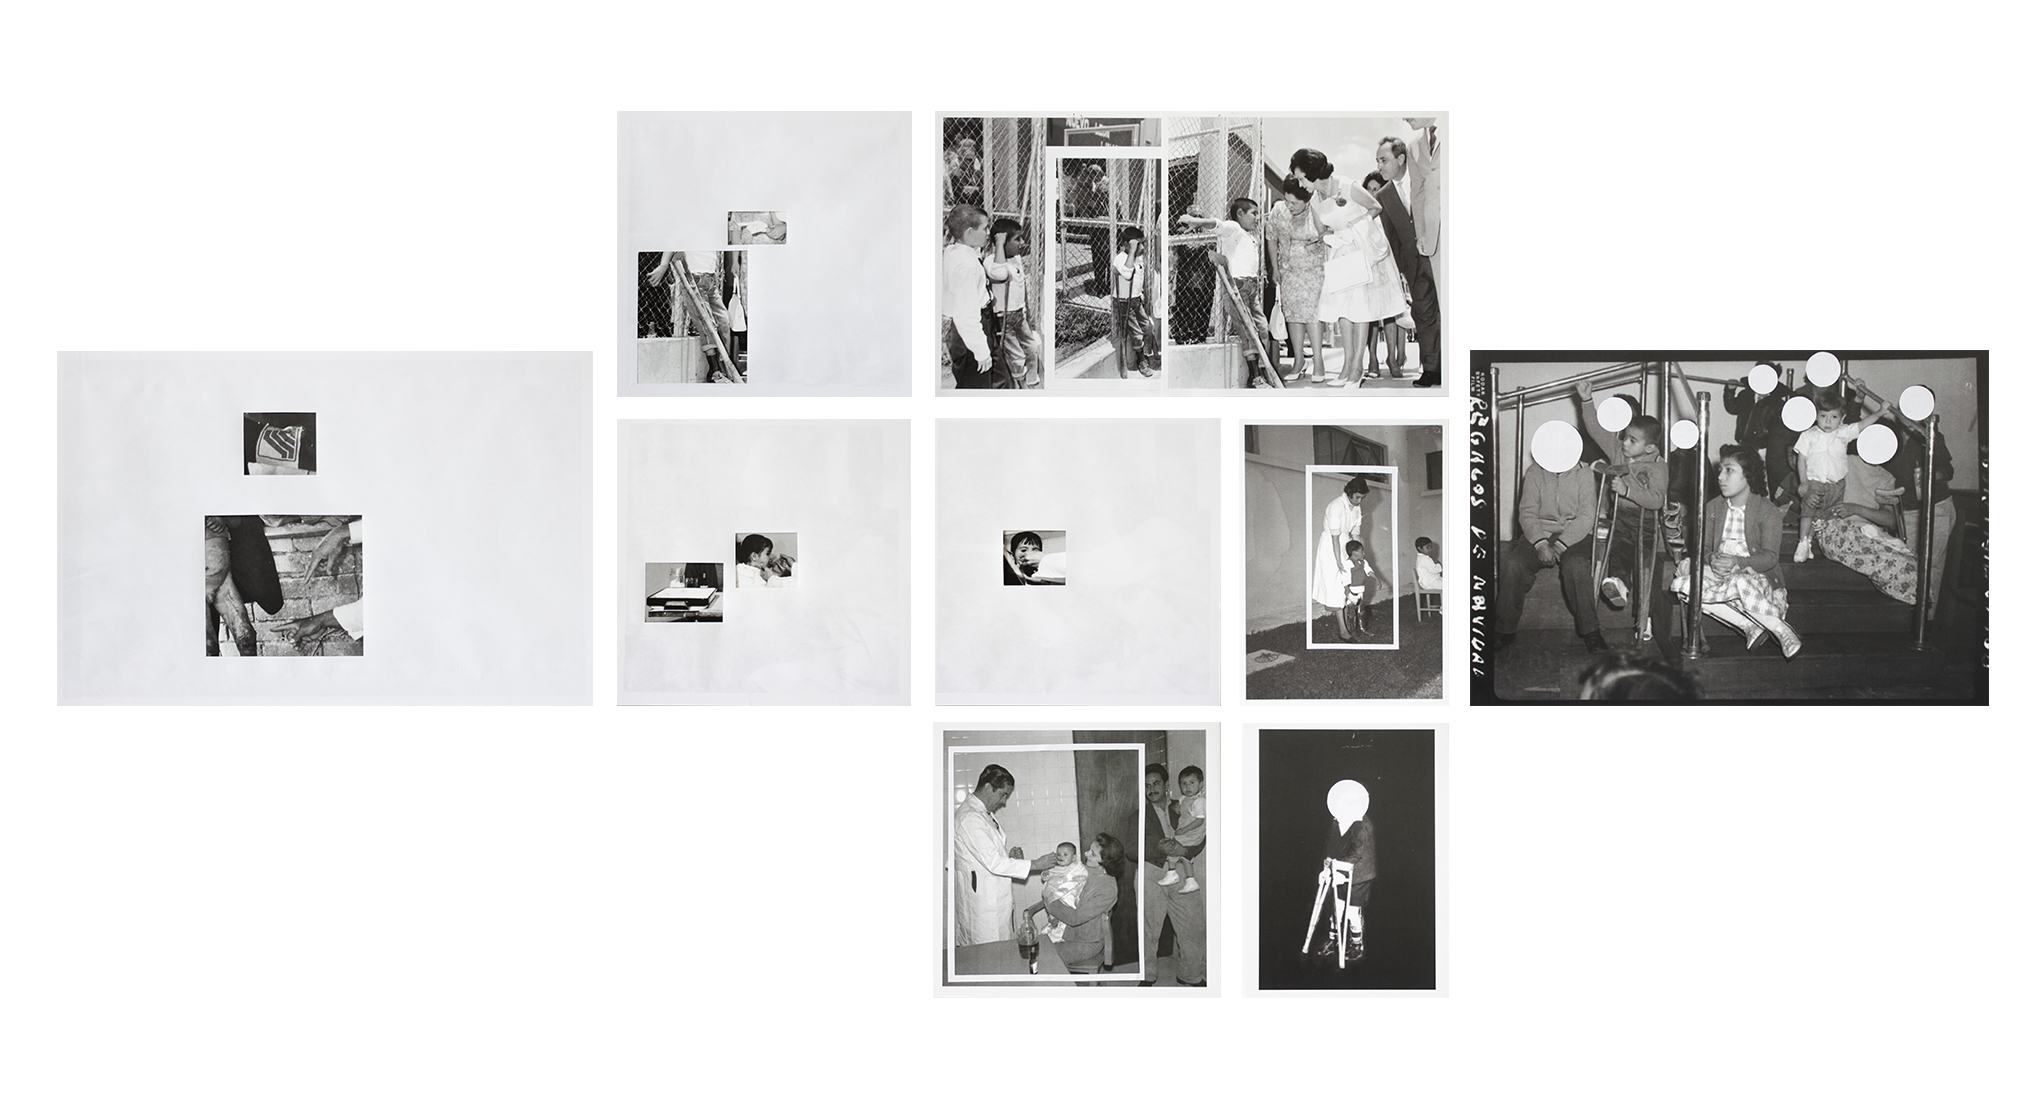 Polyptych of nine different black and white photographs of different sizes and formats. Four photographs are covered in white and only small sections are visible: the Ministry of Health’s logo, hands pointing at legs, crutches, hands administering oral vaccine to a child, medical tools. Three photographs have white rectangles framing a section of the scene: a boy with crutches being stared at by some adults, a young woman holding a young child with leg braces, a woman holding a baby while a doctor administers a vaccine. In two photographs, white circles cover the faces of children, one on a child with crutches, and two on children with no visible walking aids.